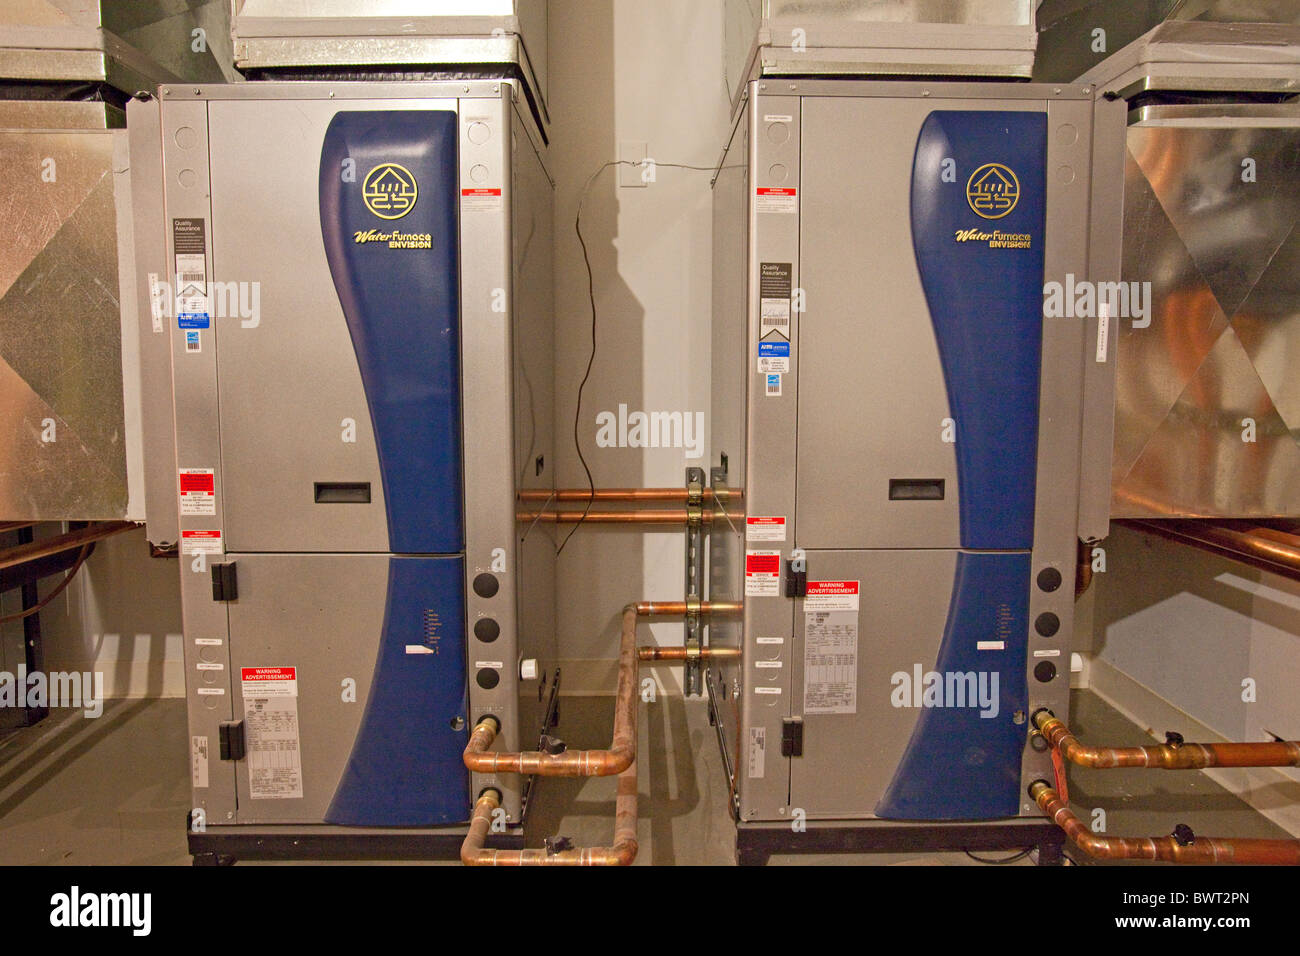 Inspiration Palads ukuelige Heat Pump High Resolution Stock Photography and Images - Alamy